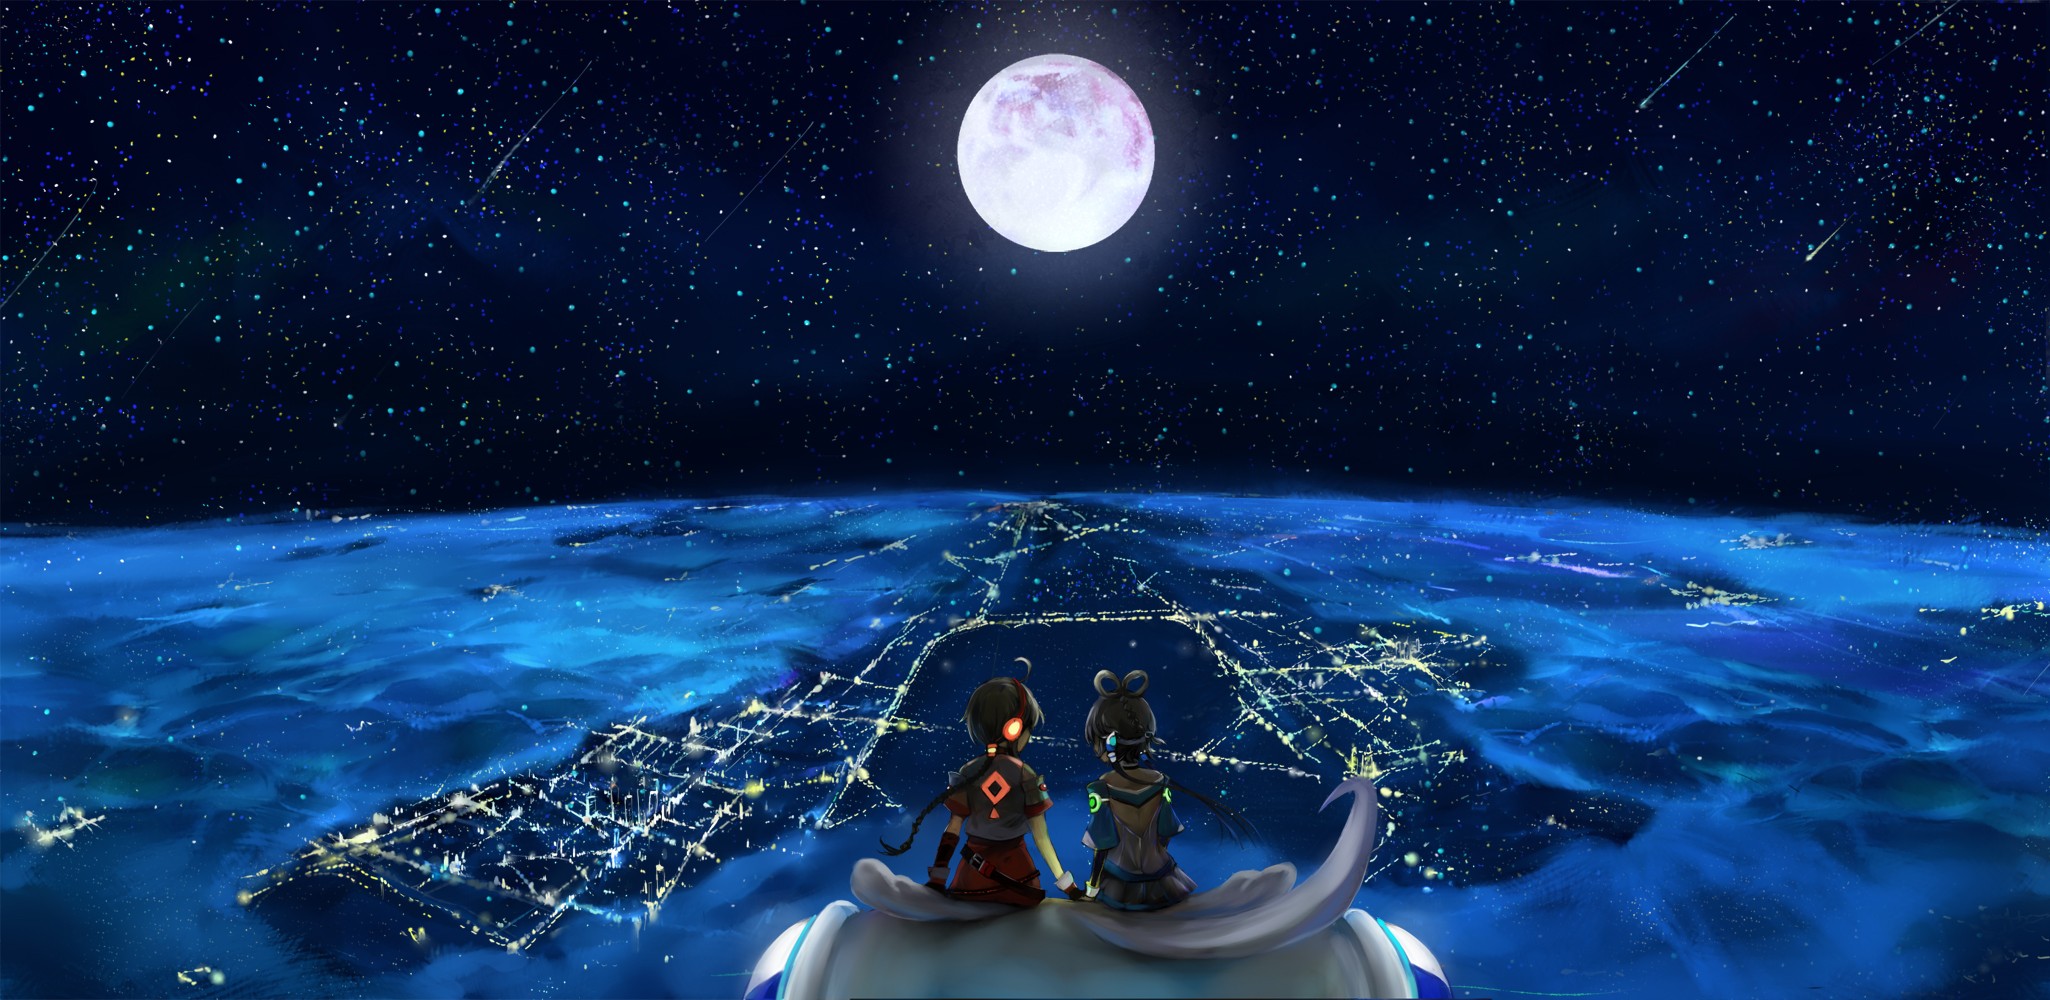 headphones, Landscapes, Vocaloid, Night, Stars, Moon, Long, Hair, Twintails, Scenic, Sitting, Ponytails, Ahoge, Holding, Hands, Gray, Hair, Full, Moon, Anime, Girls, Hair, Ornaments, Cities, Luo, Tianyi, Skies, Wallpaper